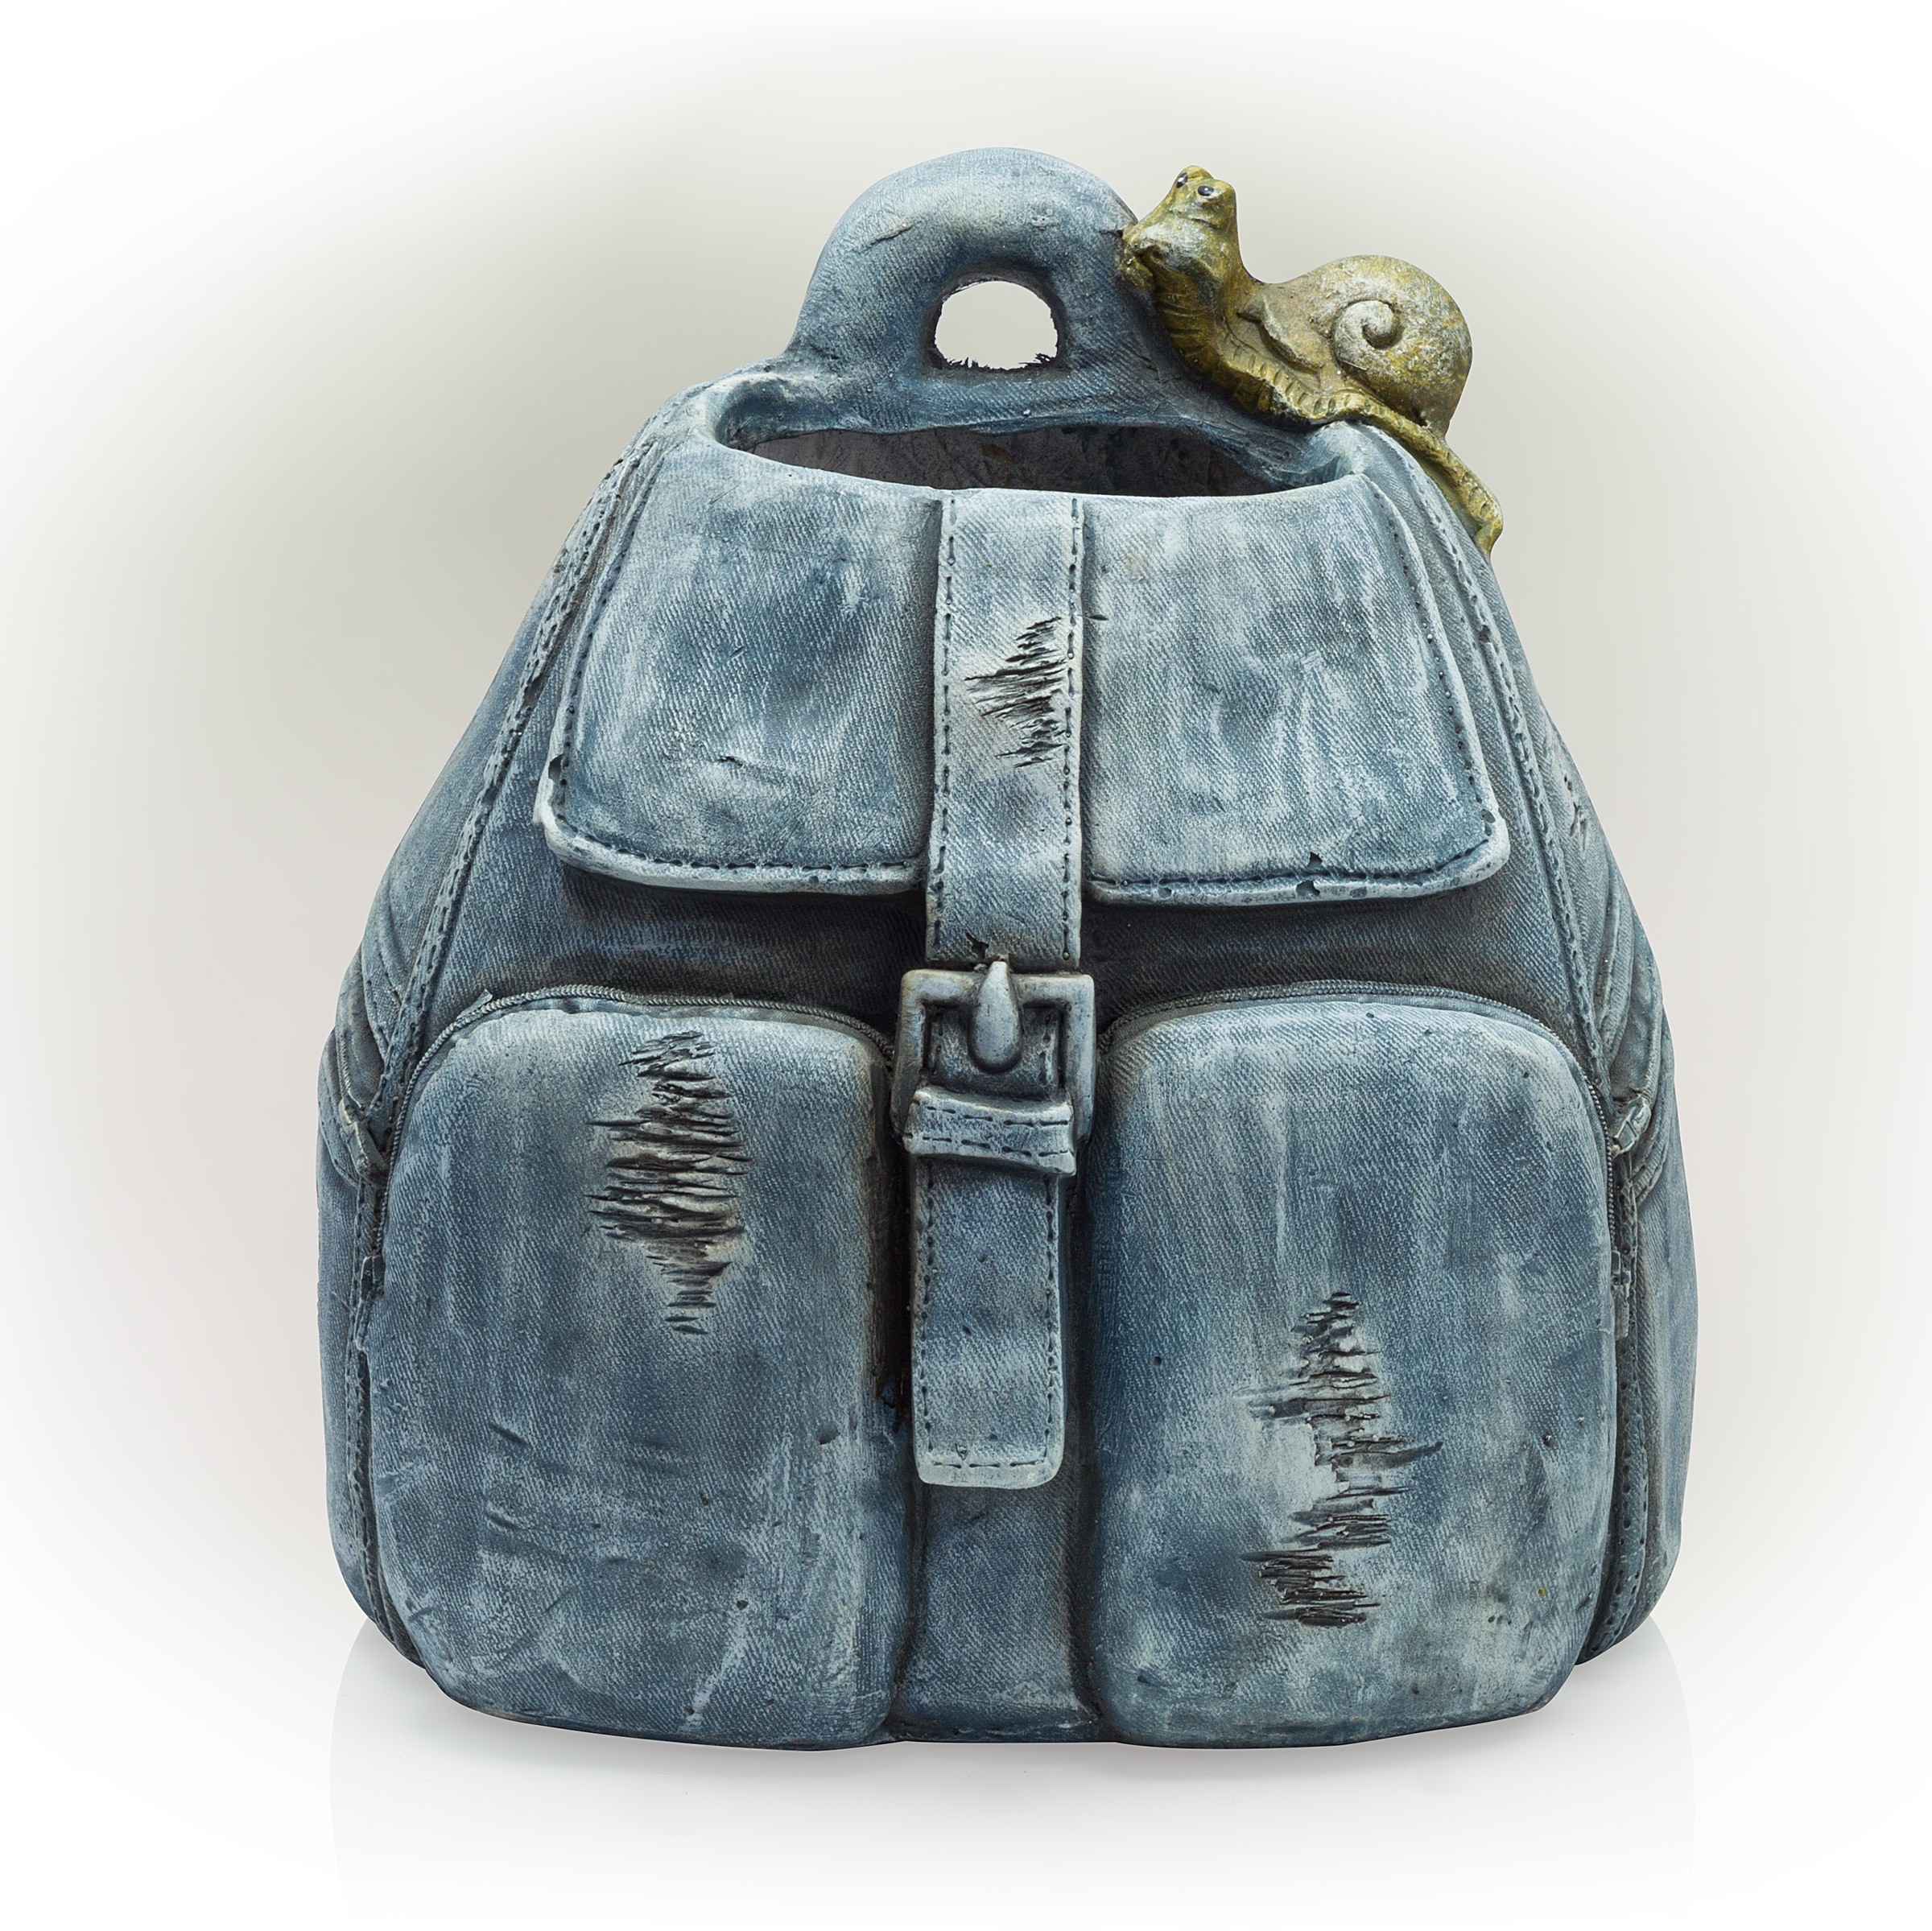 12" Rugged Denim Backpack Flower Planter with Snail